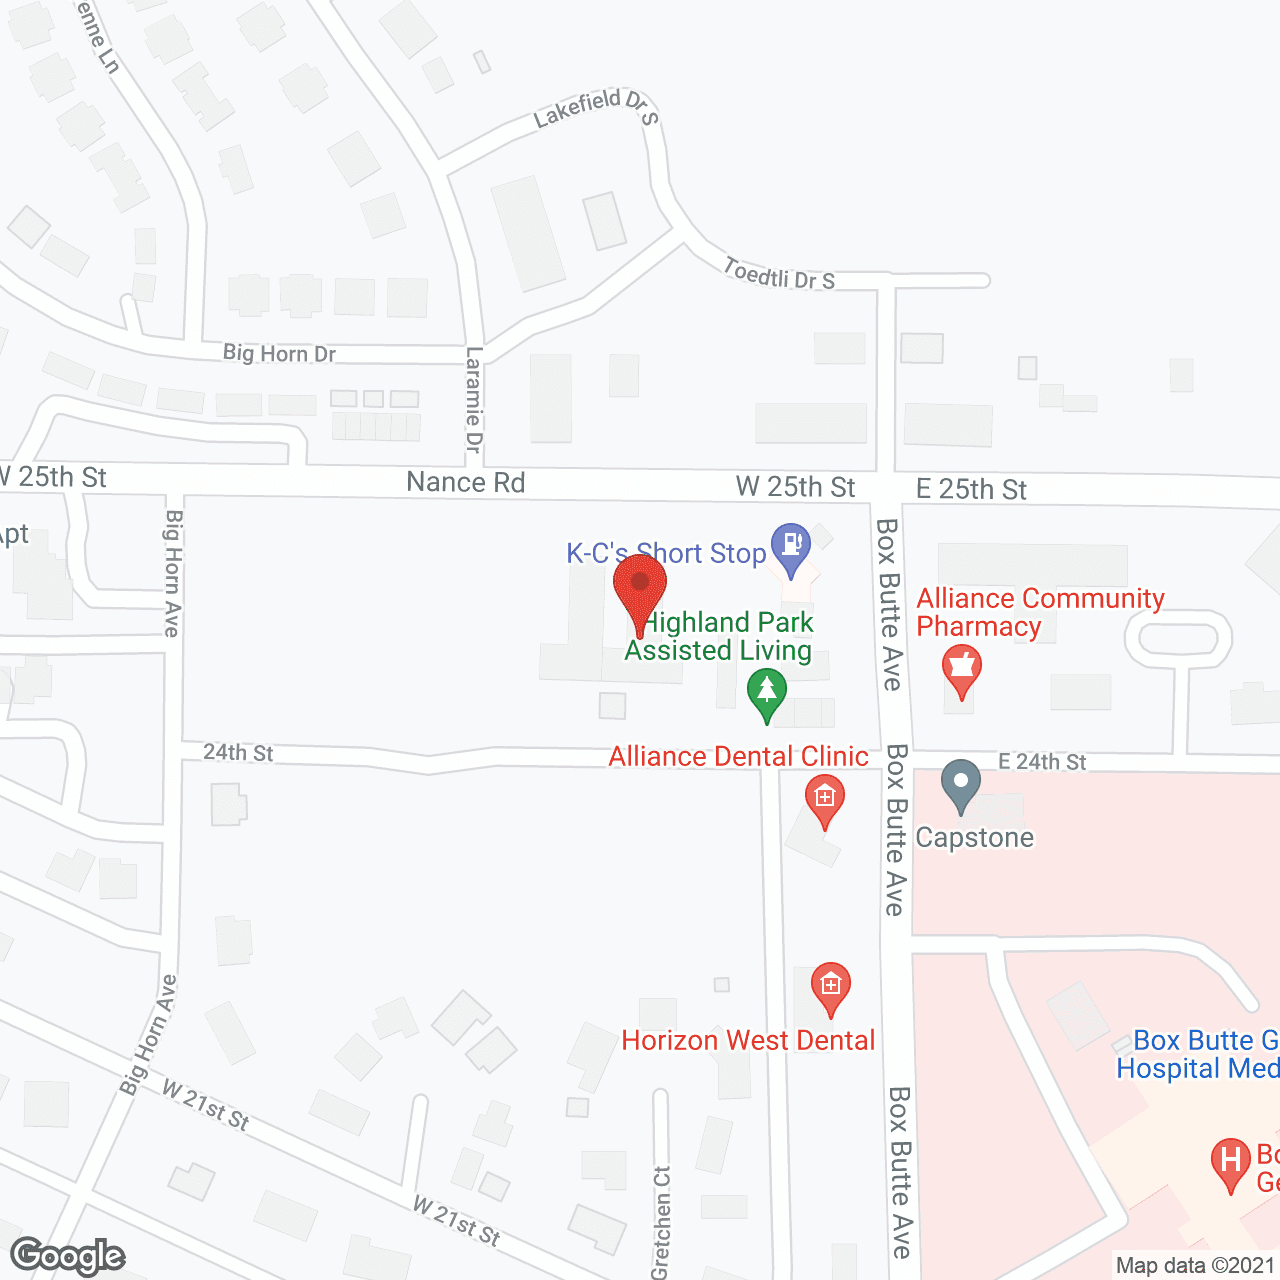 Highland Park Assisted Living in google map